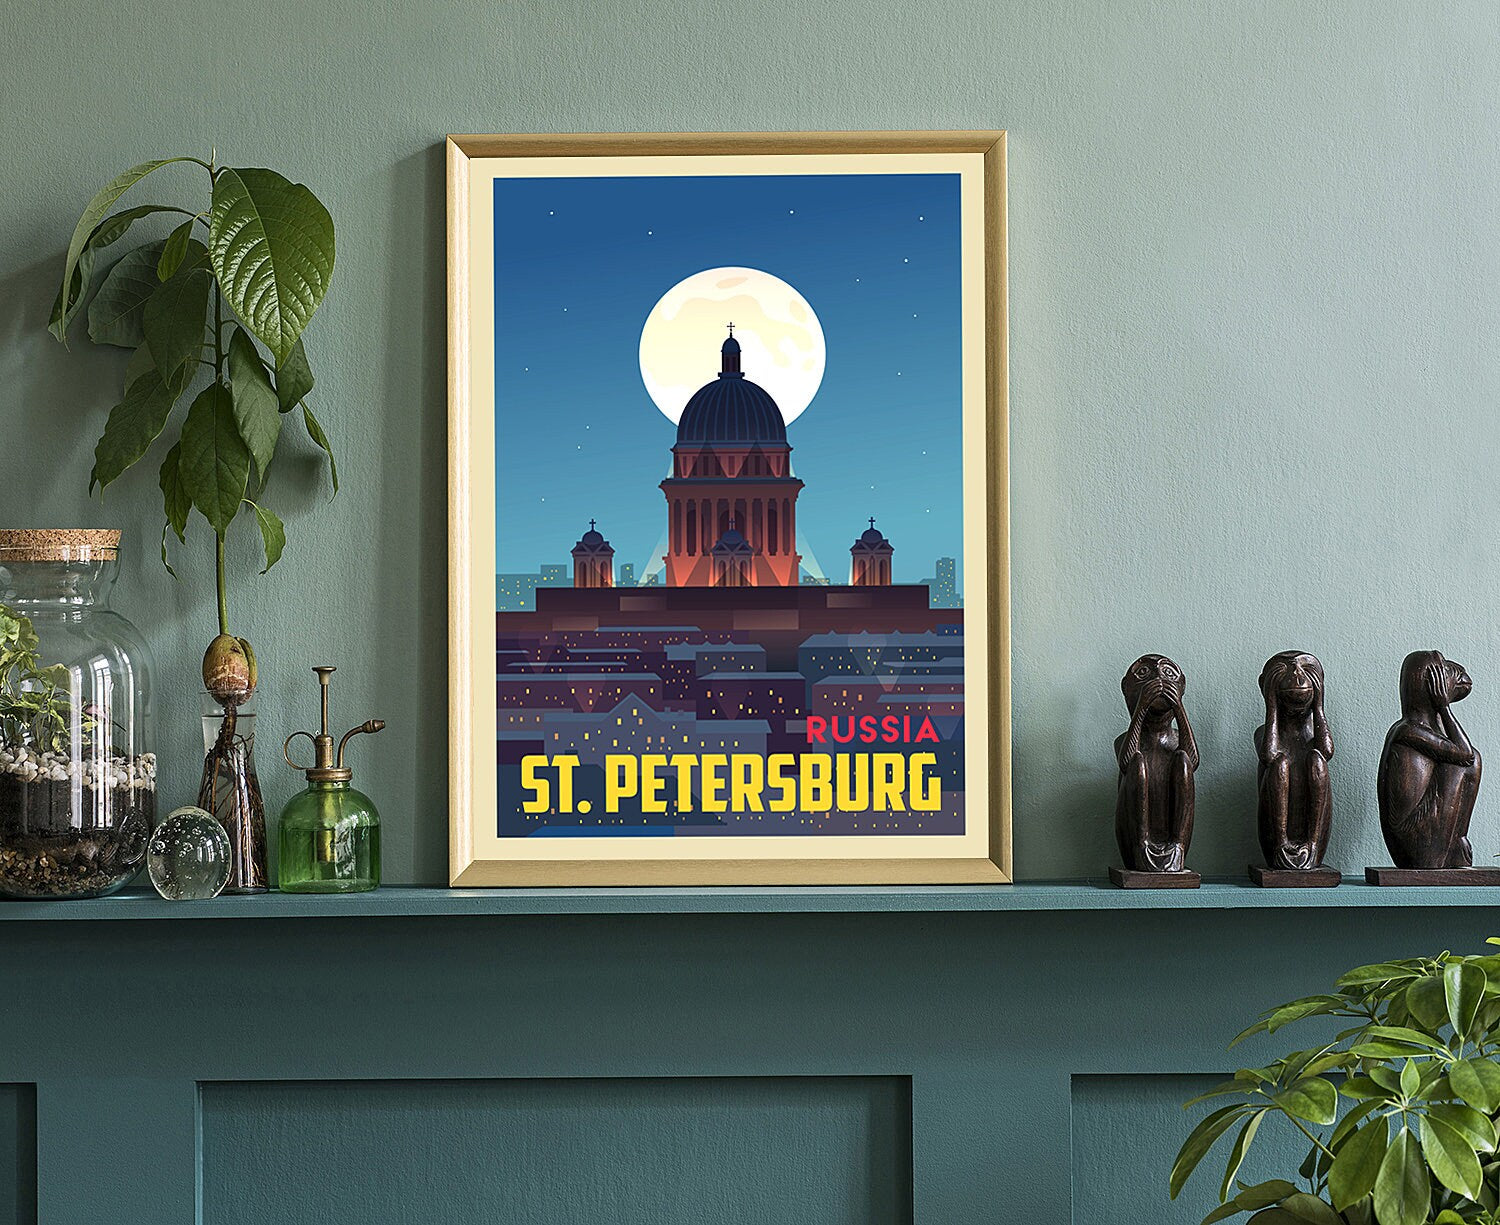 Russia ST Petersburg Vintage Rustic Poster Print, Retro Style Travel Poster